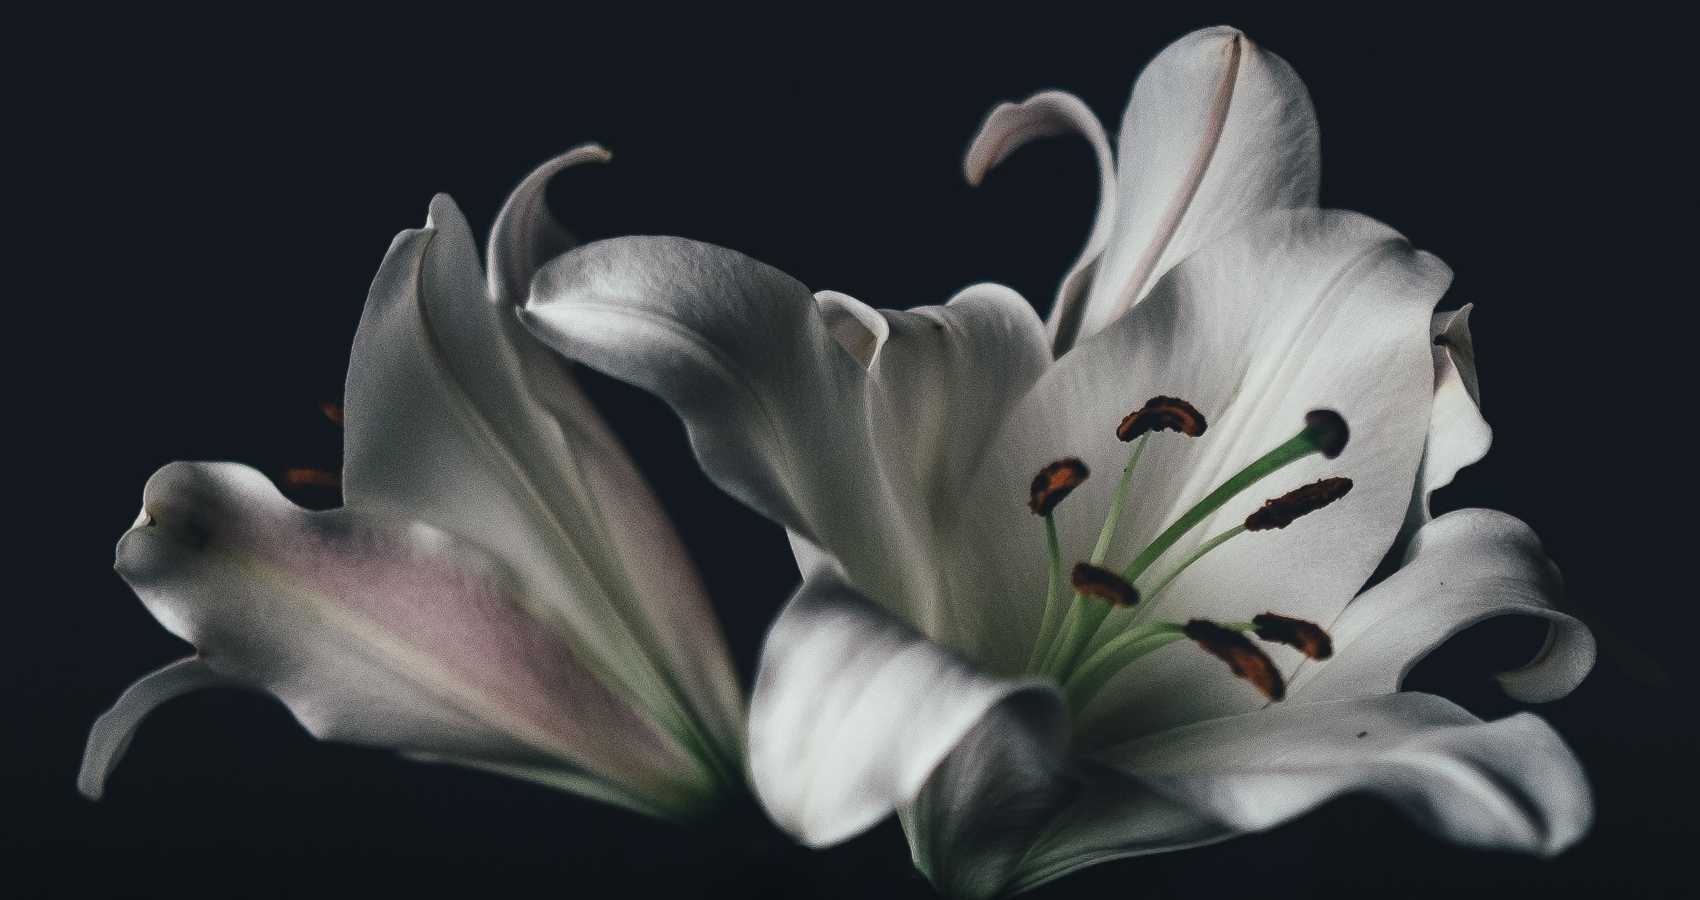 Lilies, a poem written by Polly Oliver at Spillwords.com